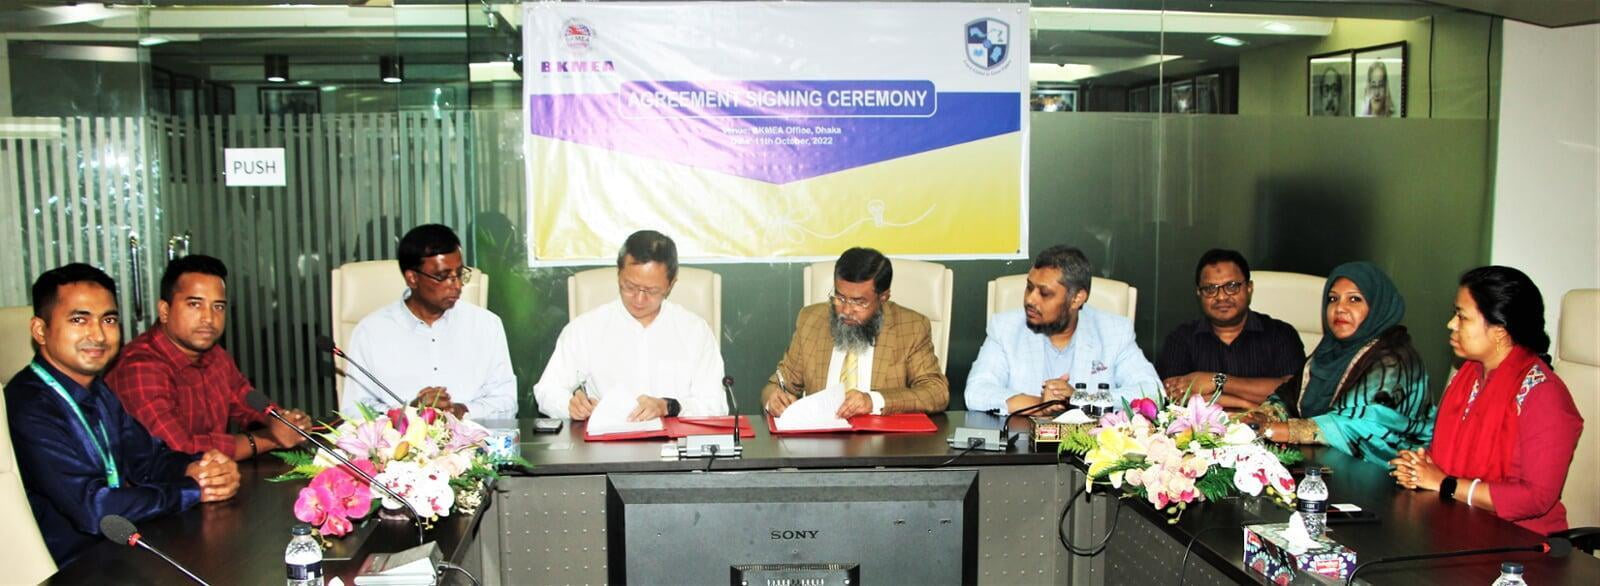 Academy of Garments Technology Bangladesh and BKMEA has signed MoU to increase the productivity of mid-level management in Knit factories